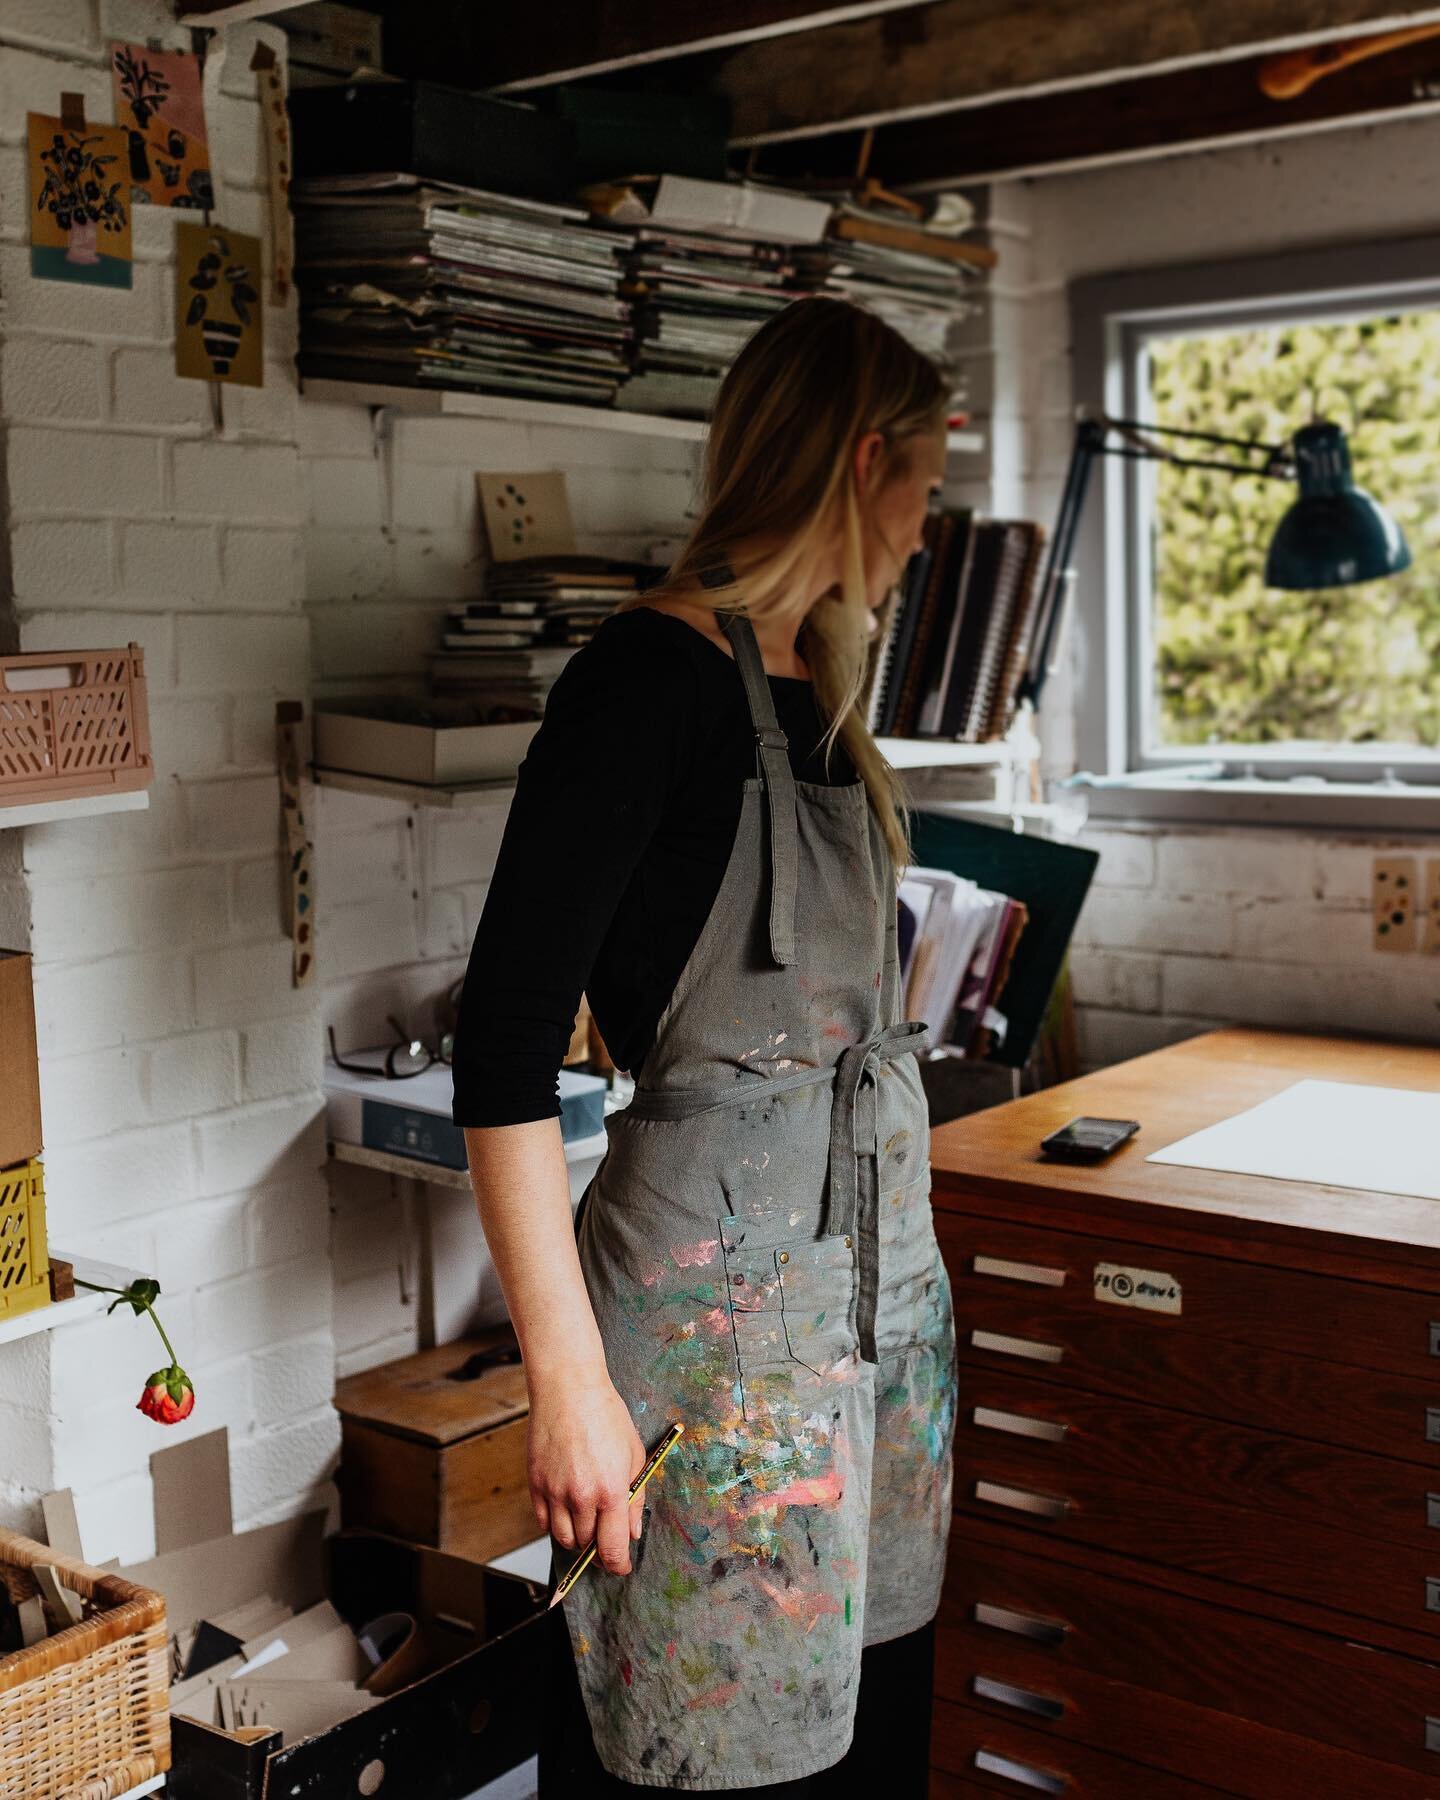 ✨Meet The Maker✨ Today featuring one of our brilliant new artists - Sheffield based printmaker Luiza Holub @luizaholub ! We asked Luiza a few questions about her practice, read below:

𝘏𝘰𝘸 𝘥𝘪𝘥 𝘺𝘰𝘶 𝘴𝘵𝘢𝘳𝘵 𝘢𝘴 𝘢 𝘱𝘳𝘪𝘯𝘵𝘮𝘢𝘬𝘦𝘳?
 
I